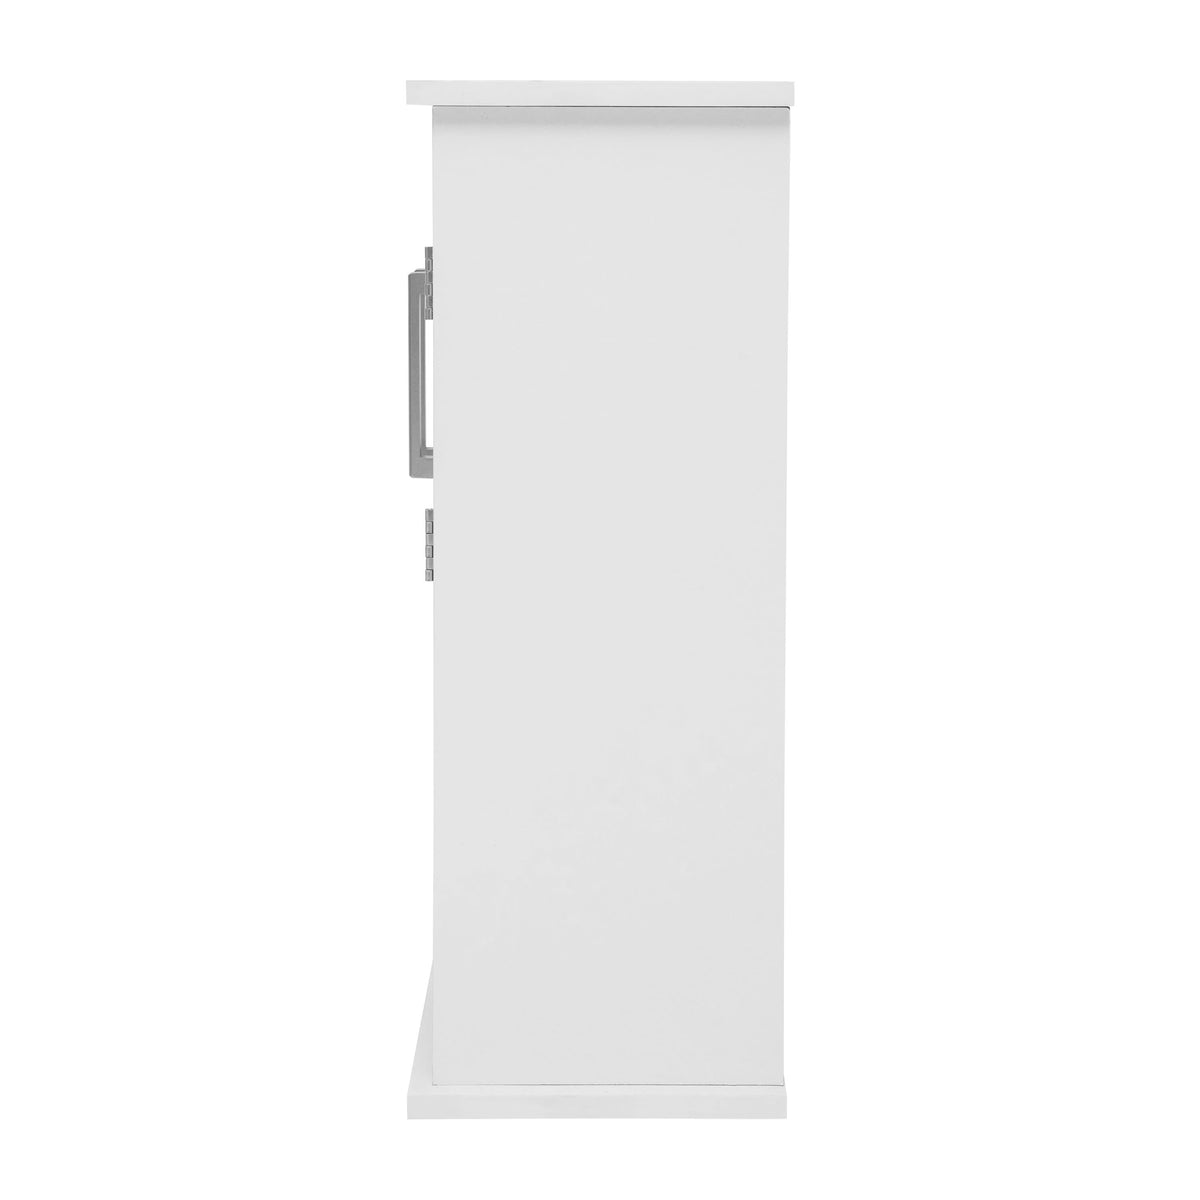 White |#| Modern Bathroom Wall Mount Medicine Cabinet with Magnetic Close Doors in White